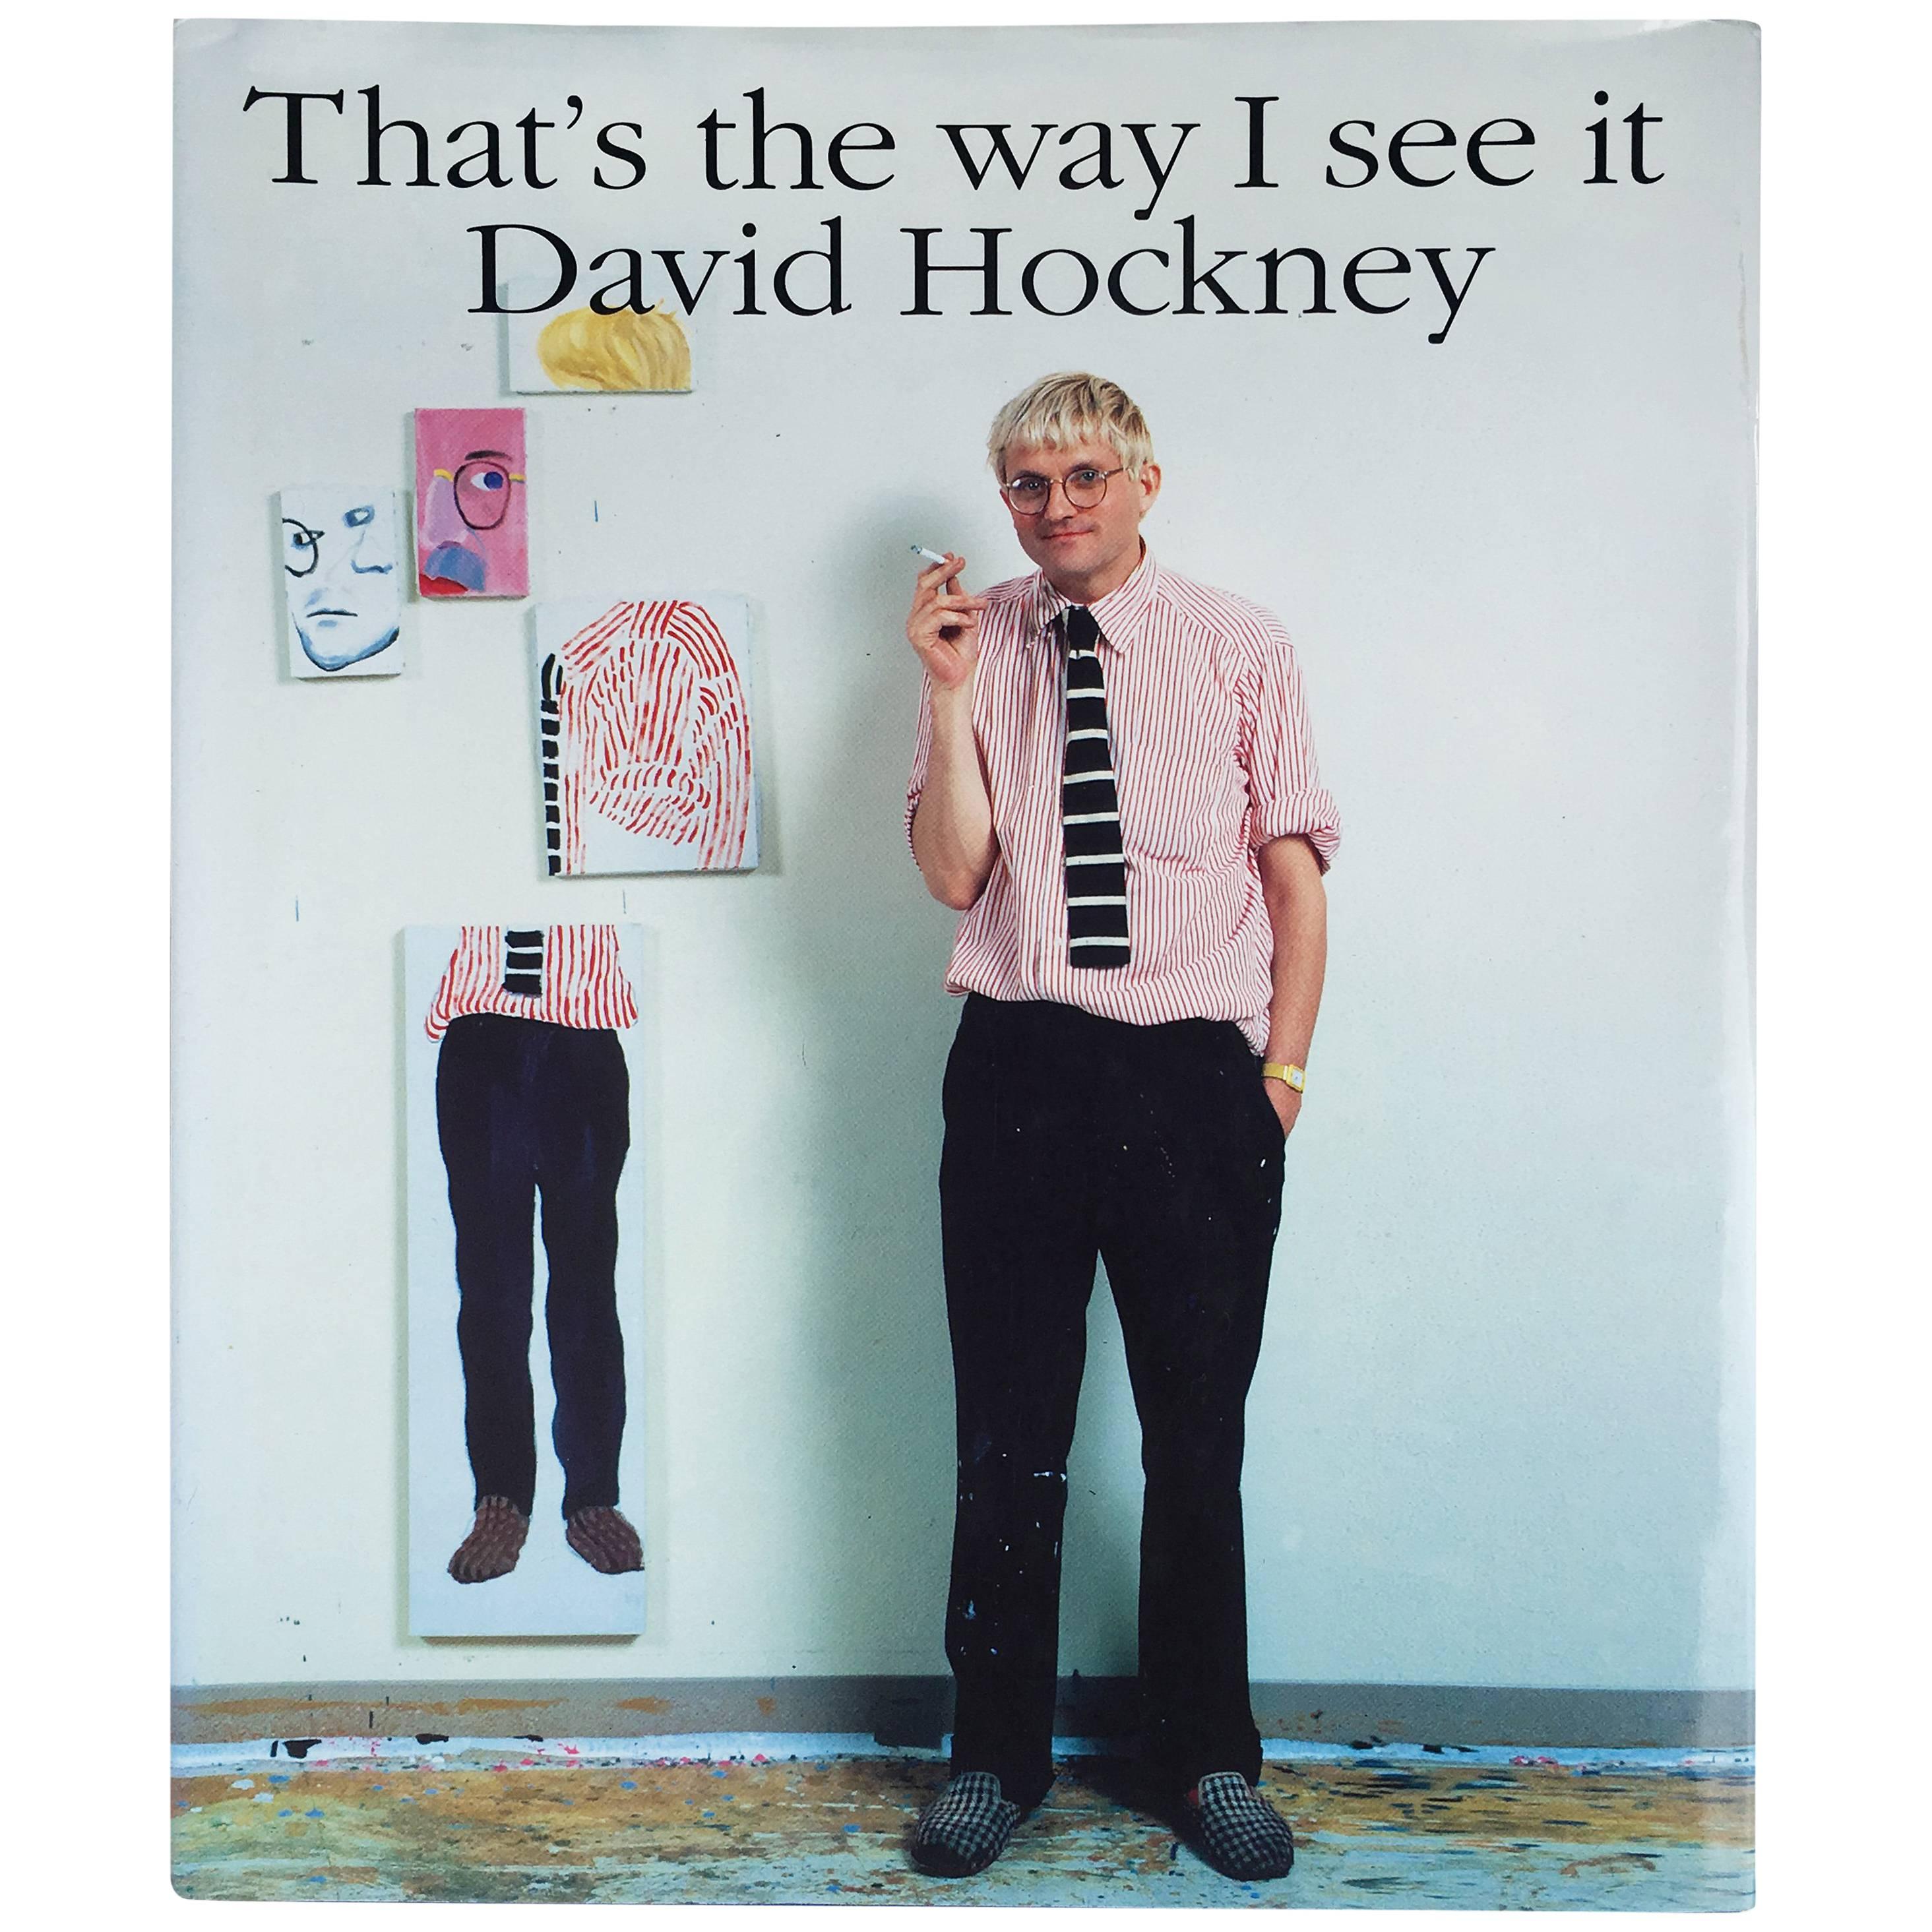 David Hockney – That's The Way I See It, 1st Edition 1993